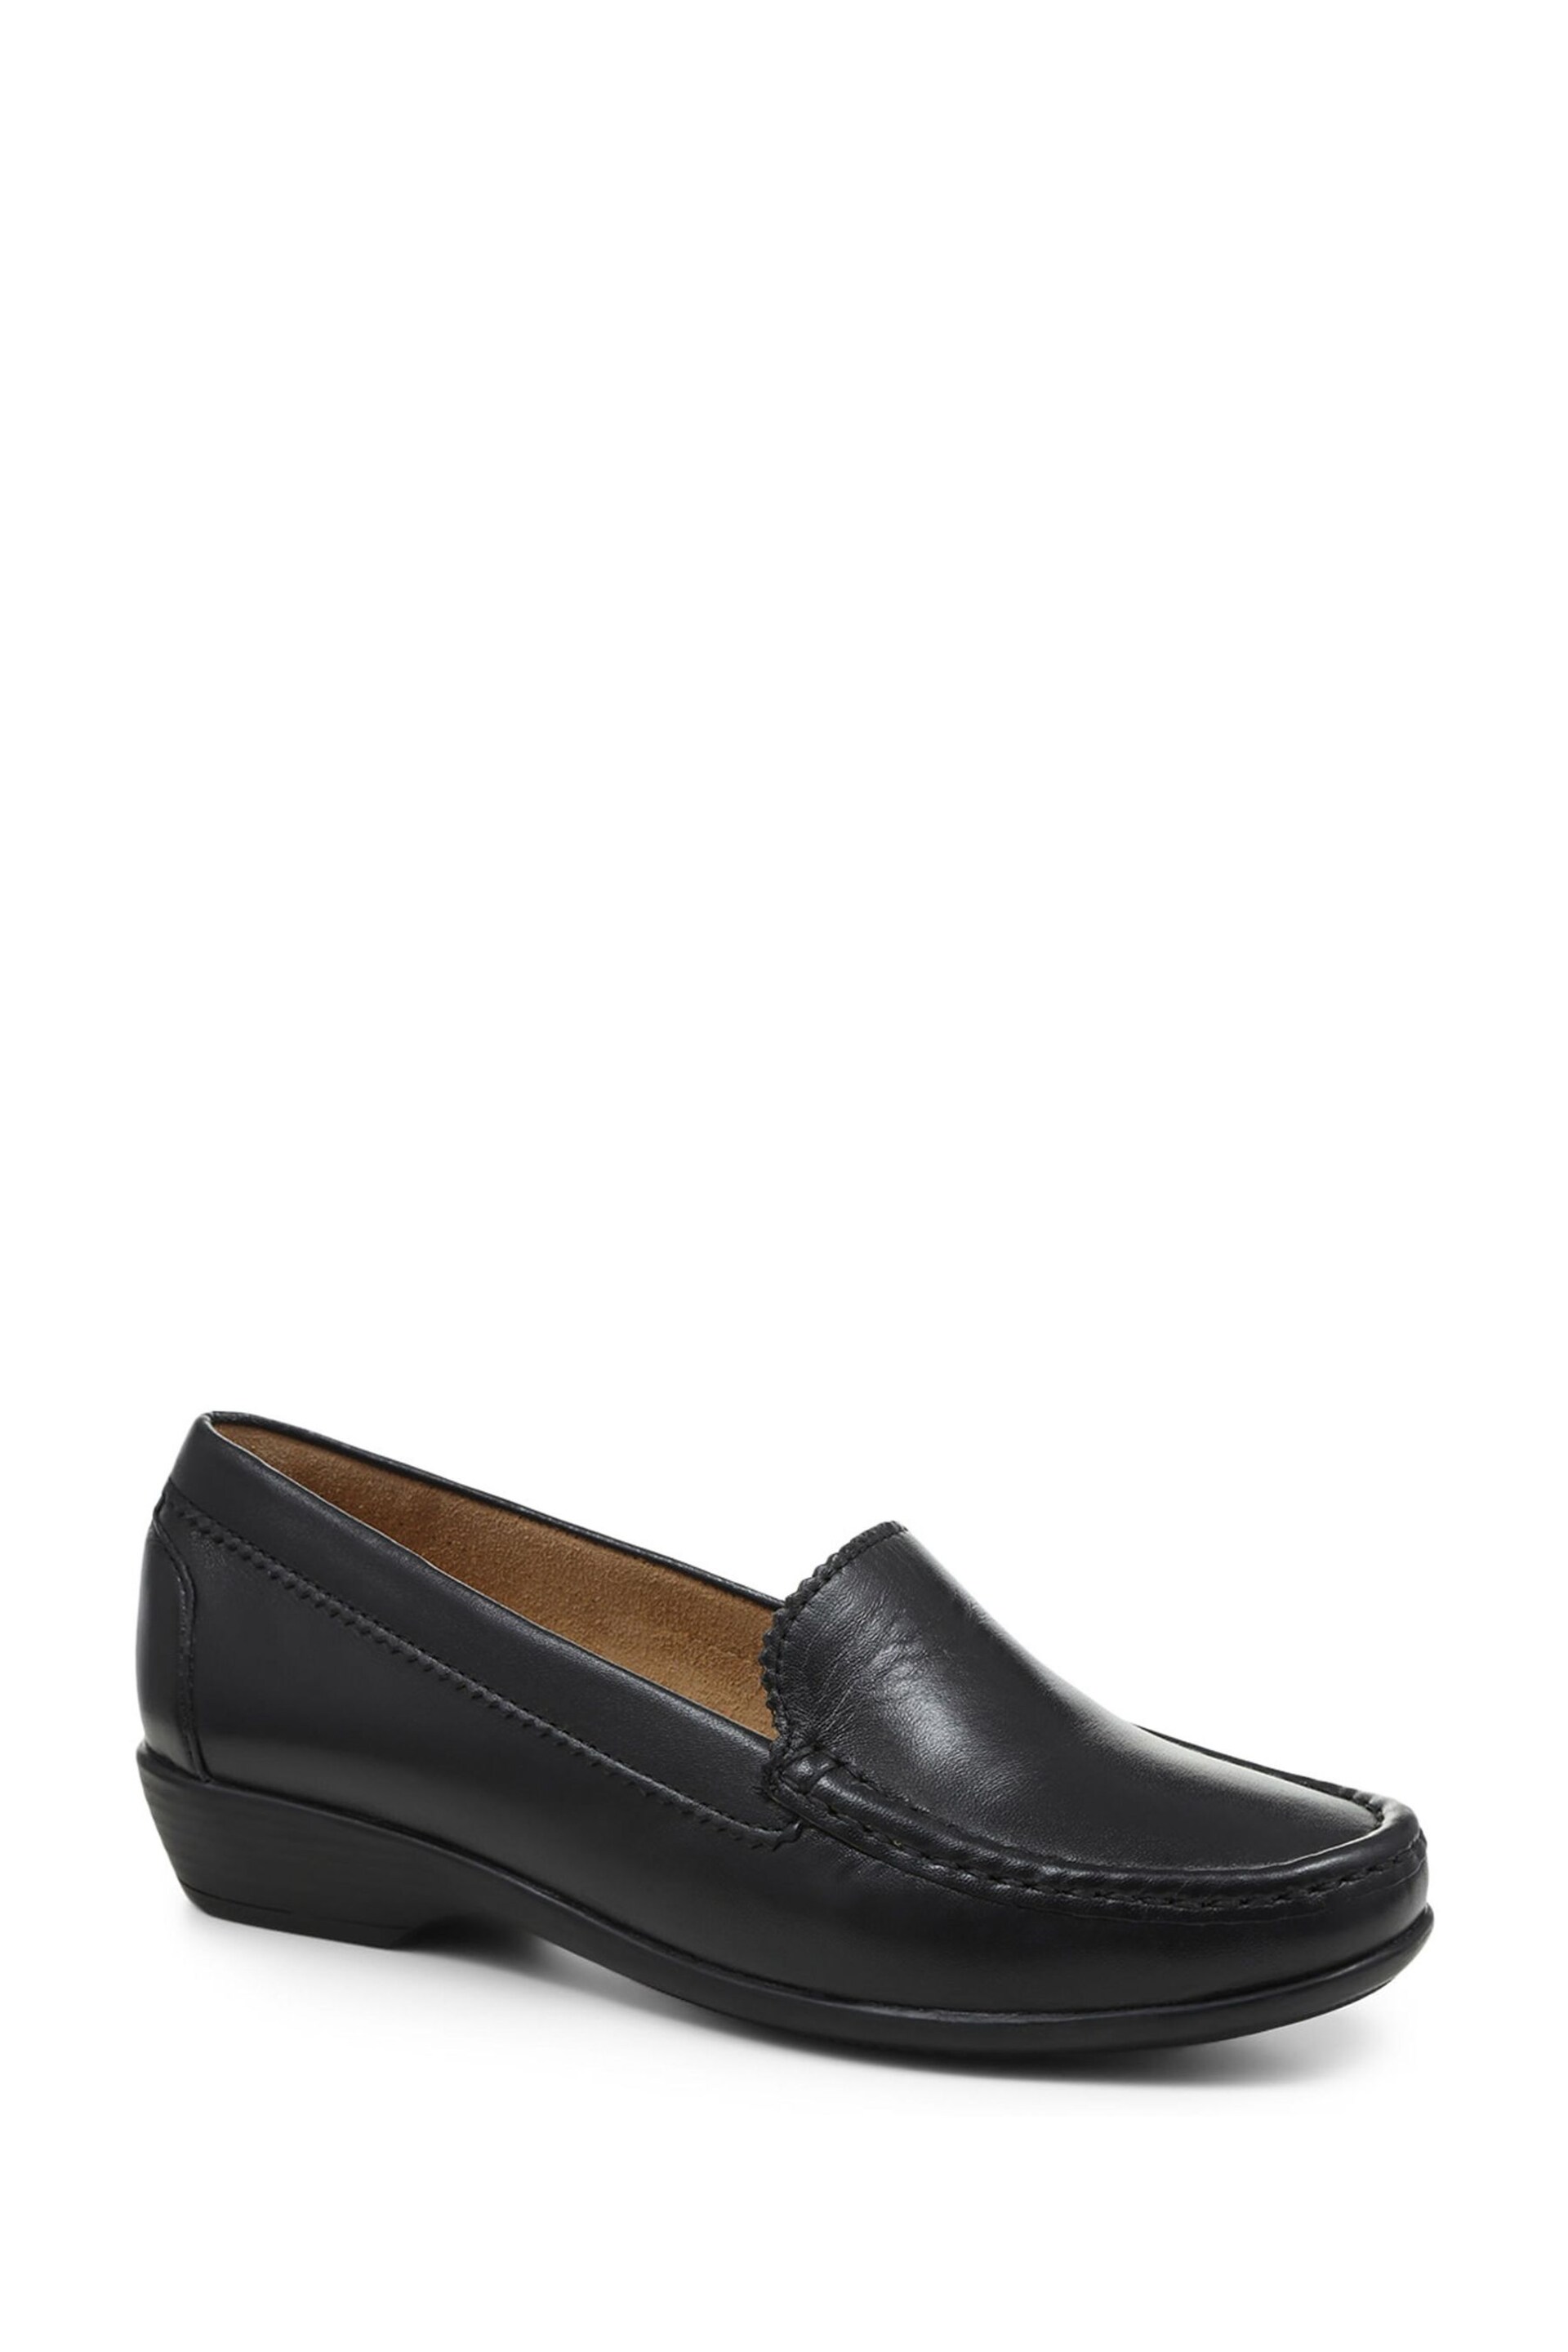 Pavers Lightweight Leather Slip-On Black Shoes - Image 2 of 5